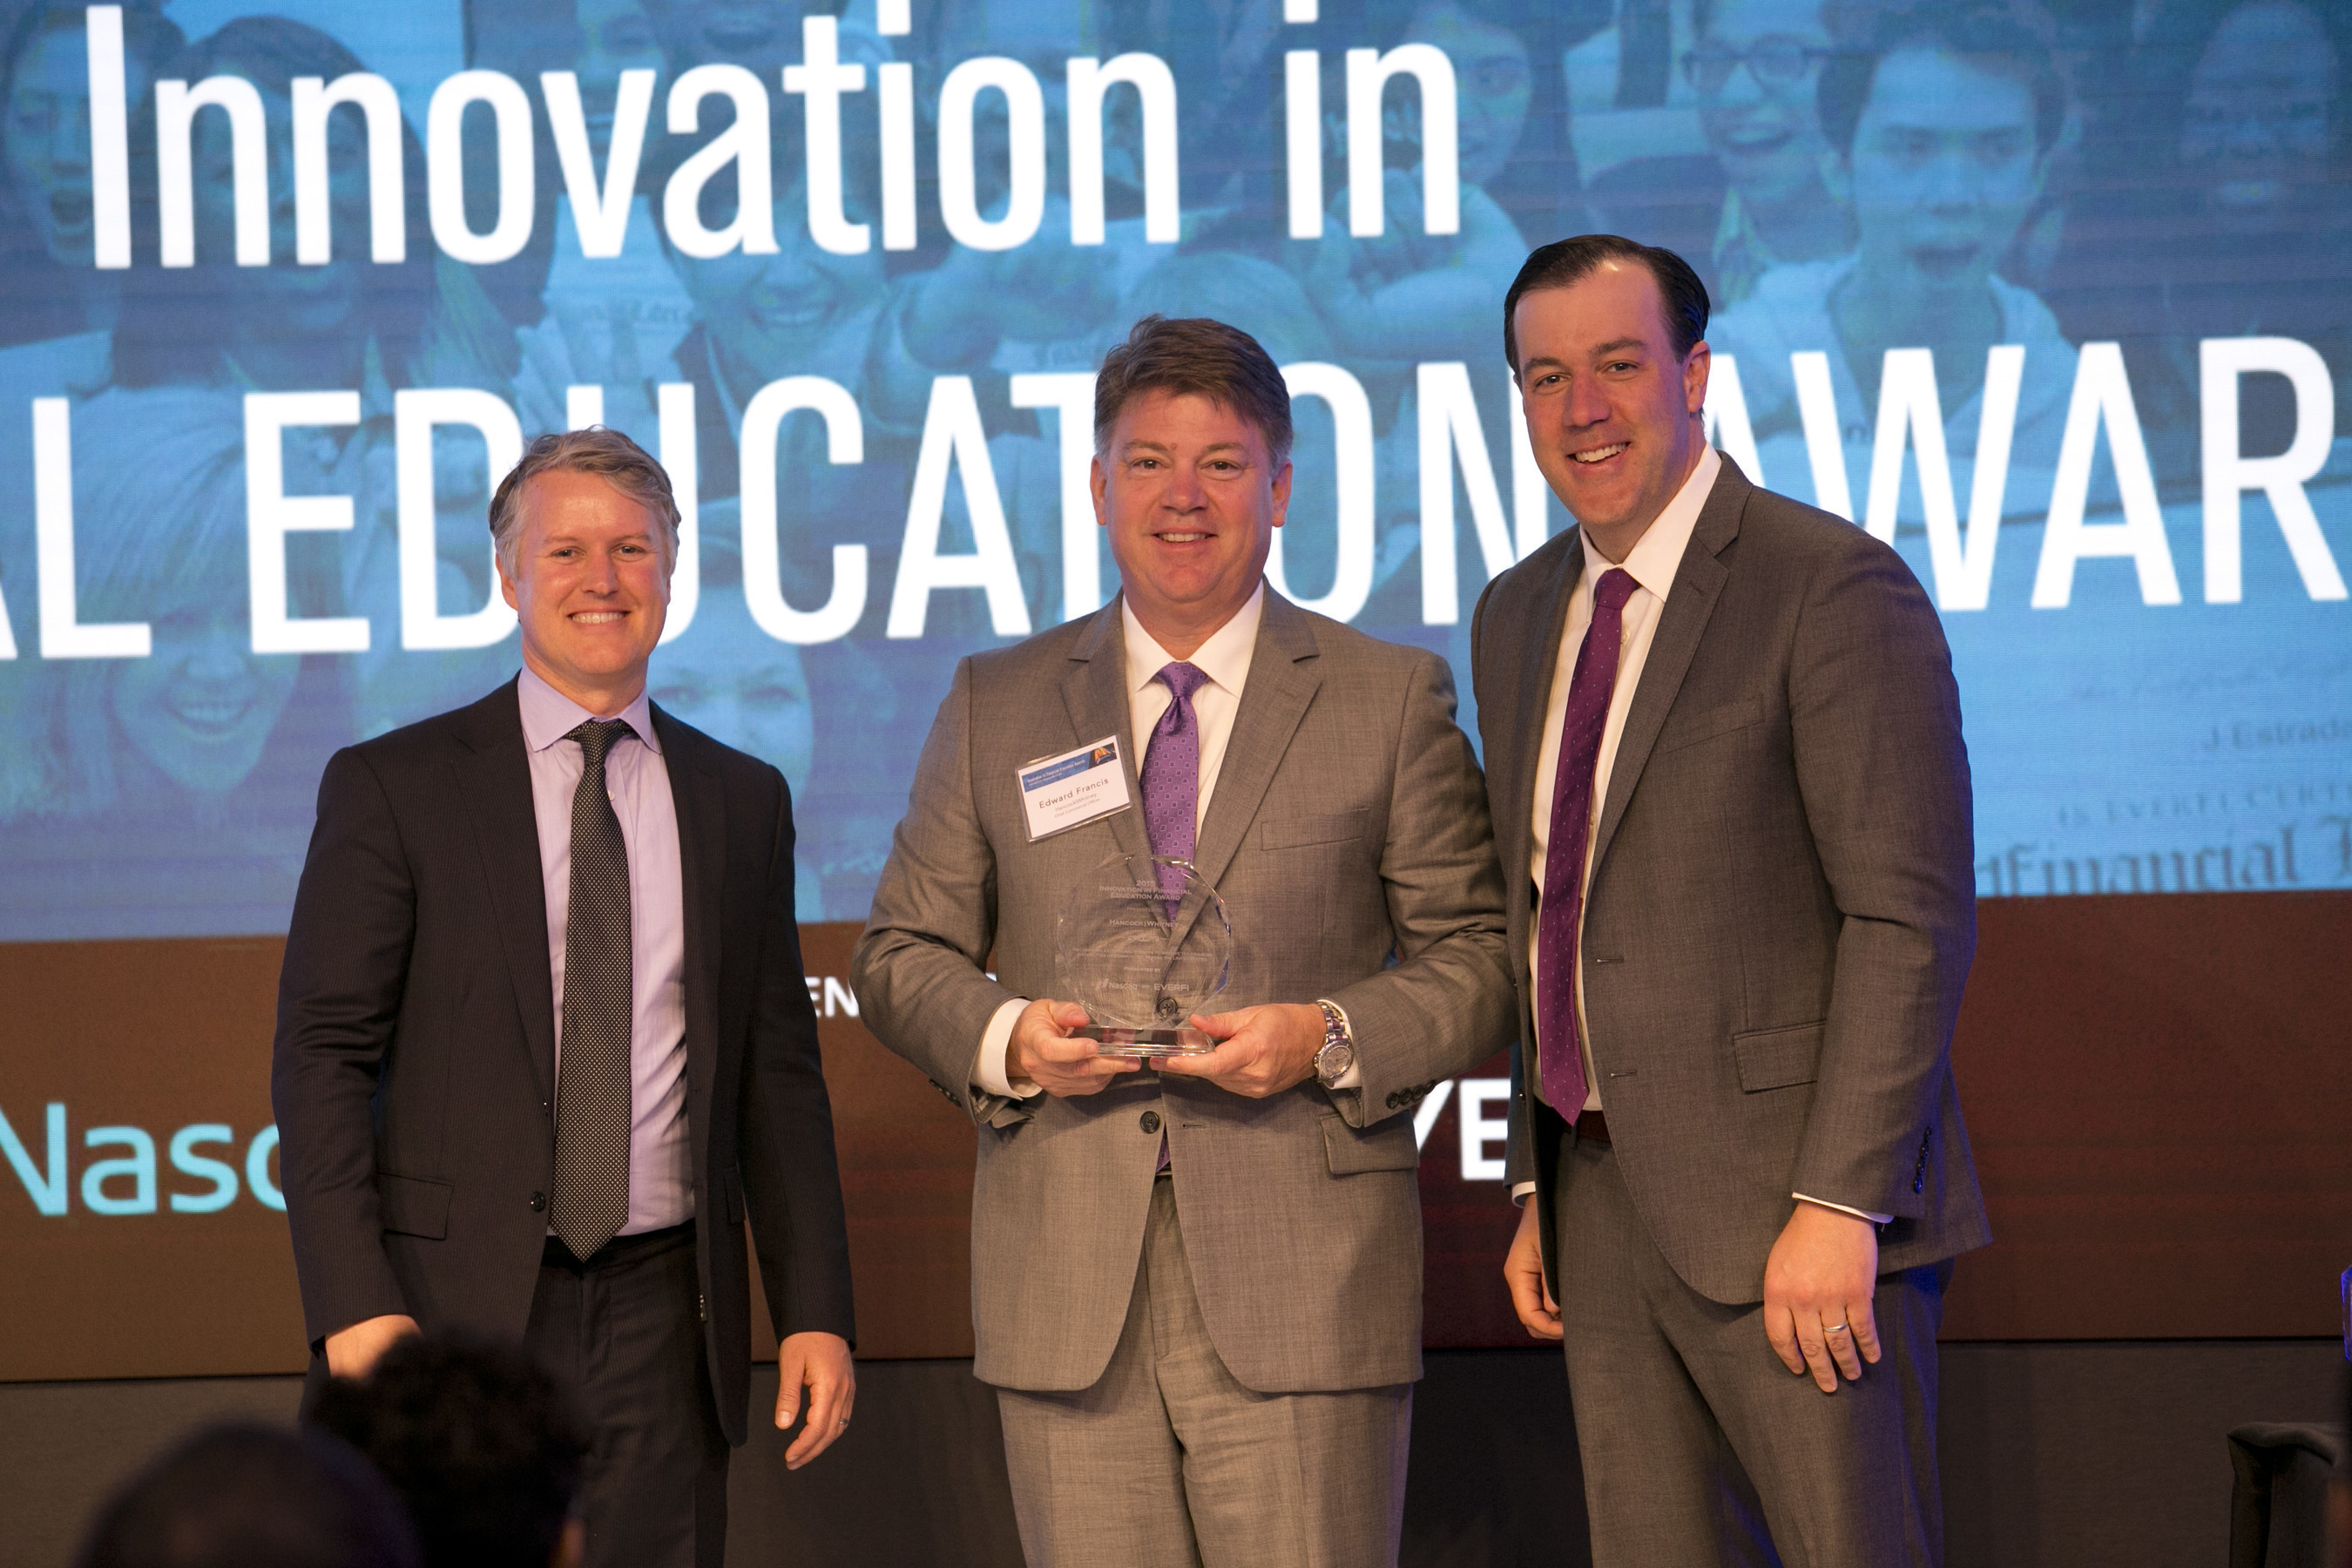 Hancock Holding Company Chief Banking Officer Edward G. Francis (center) accepts the Innovation in Financial Education Award from EverFi, Inc., co-founders CEO Tom Davidson (left) and Chief Strategy Officer Jon Chapman at Nasdaq's Marketsite headquarters in New York City.